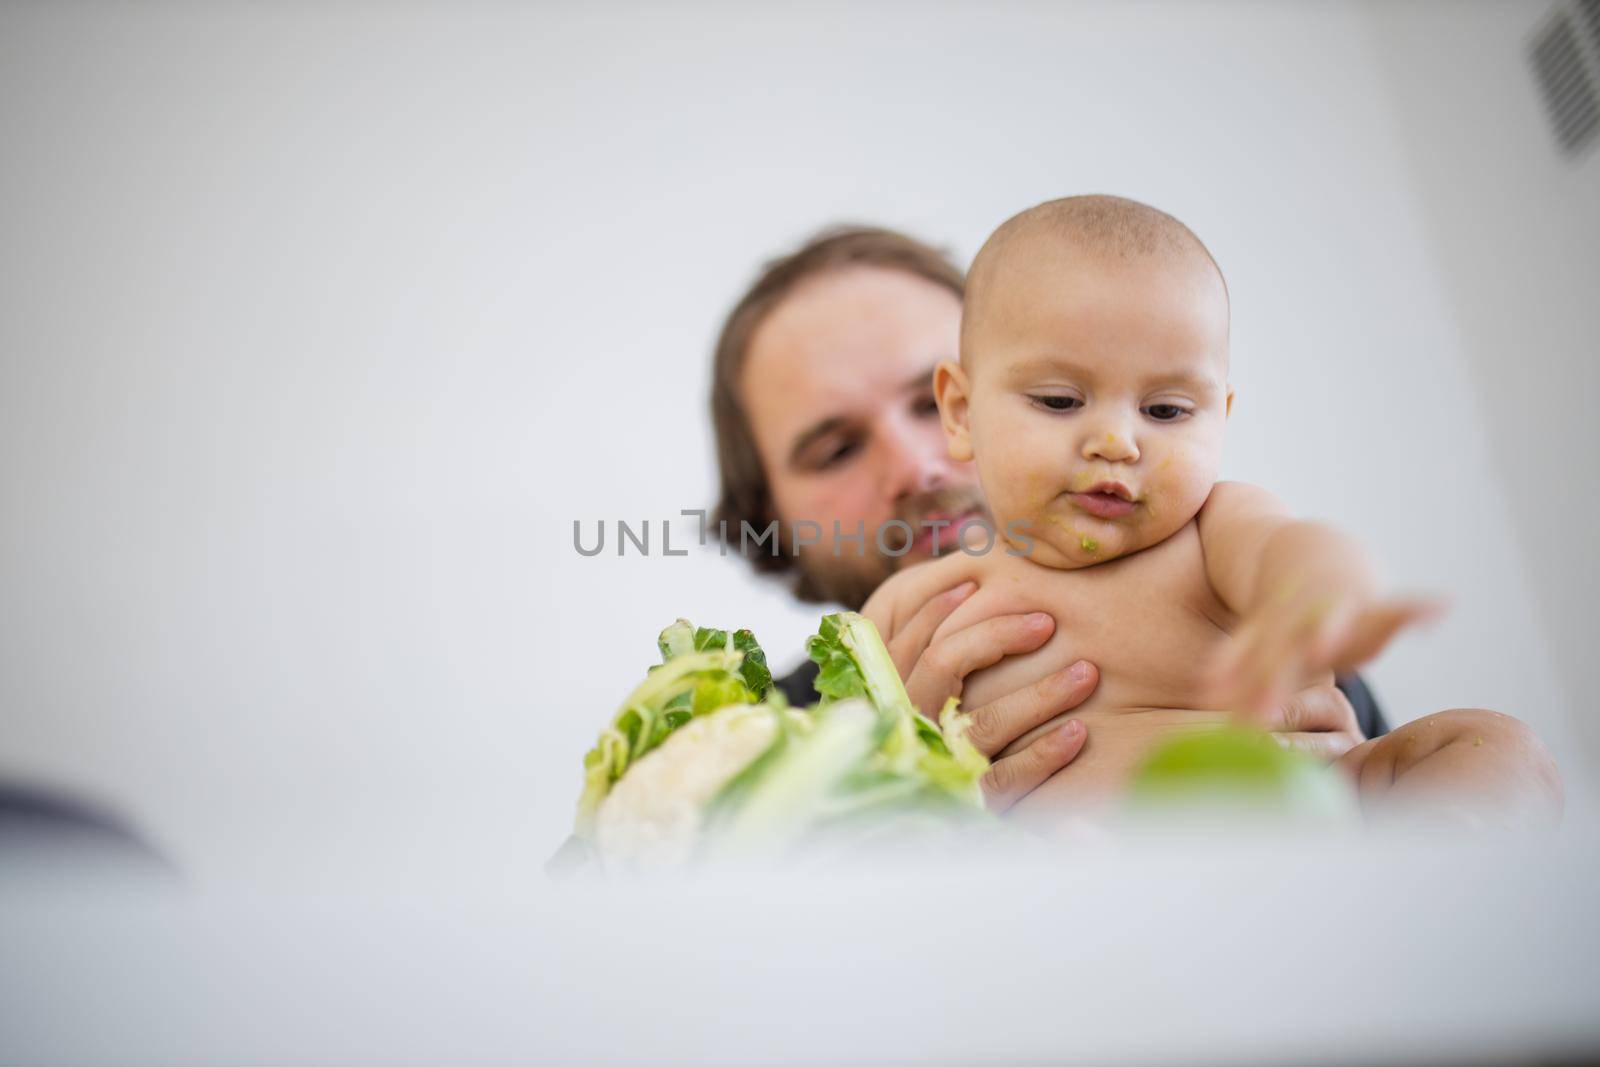 Father lovingly holding and kissing his happy baby daughter above table. Adorable baby smiling and playing with cauliflower. Babies interacting with food